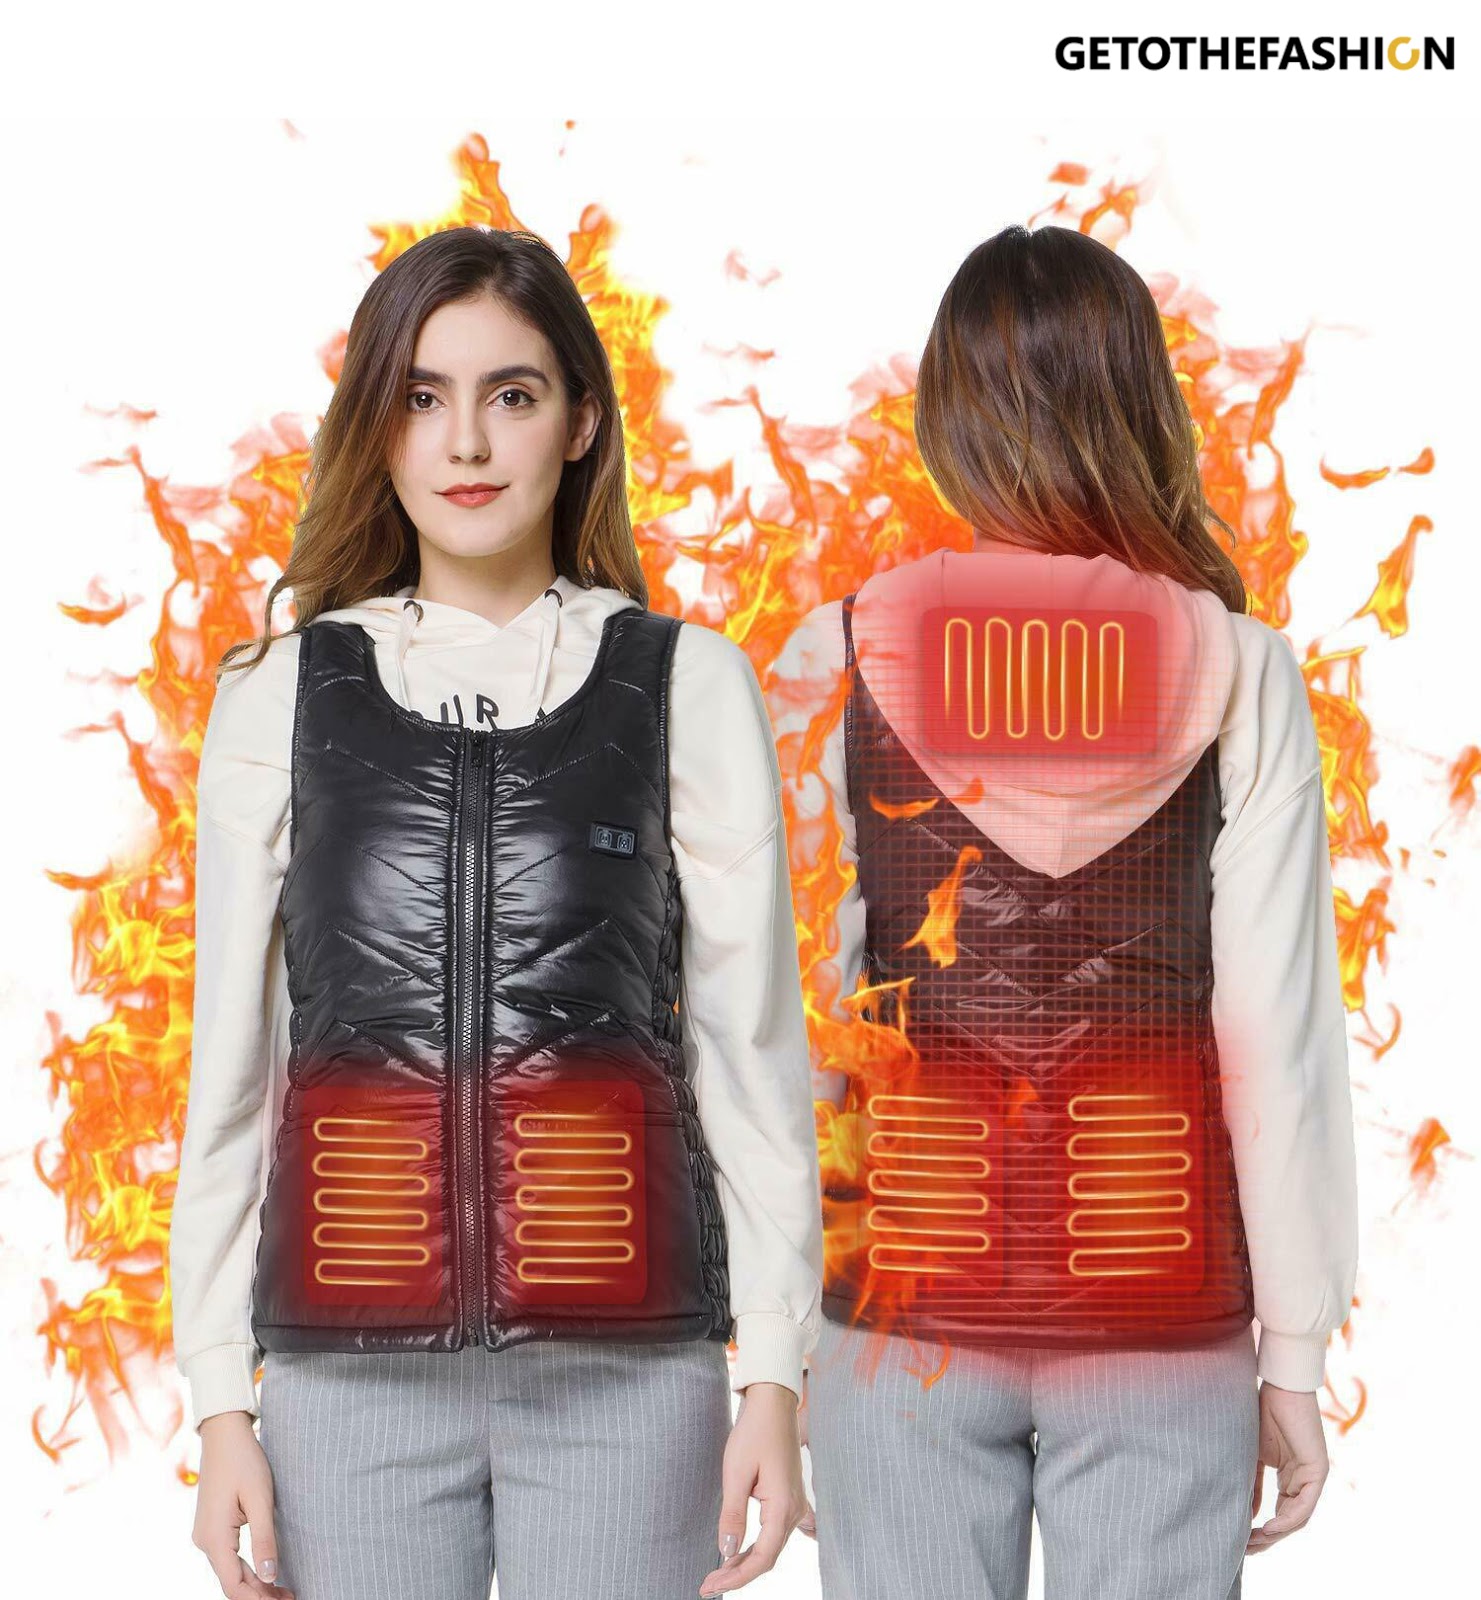 Top 10 Electric Heated Jacket For Men and Women Fashion